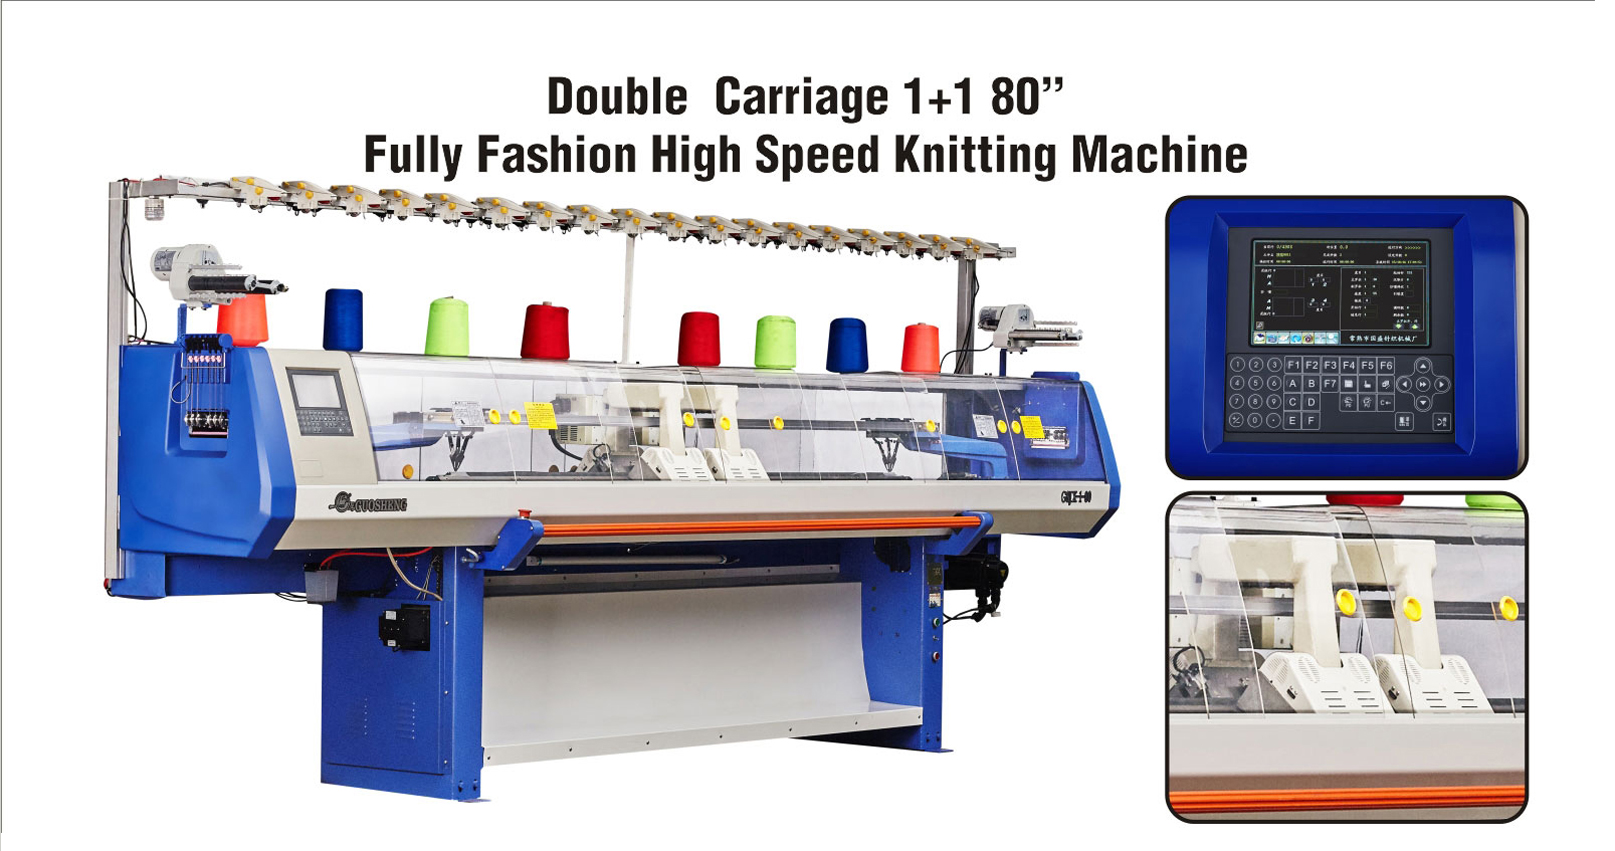 Double Carriage 1+1 80 Fully Fashion High Speed Knitting Machine